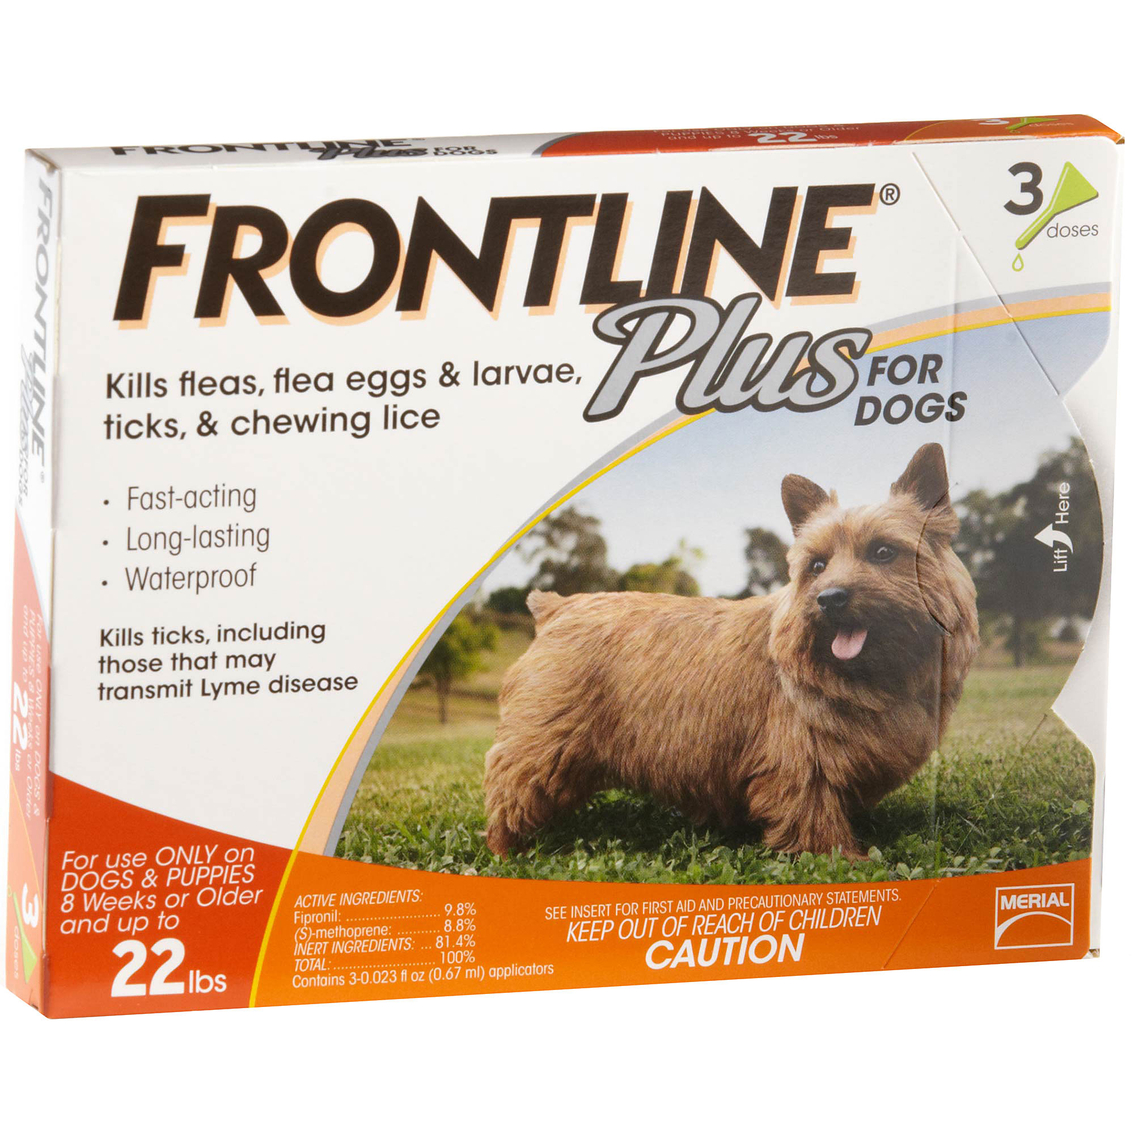 Frontline Plus for Dogs 3 pk.